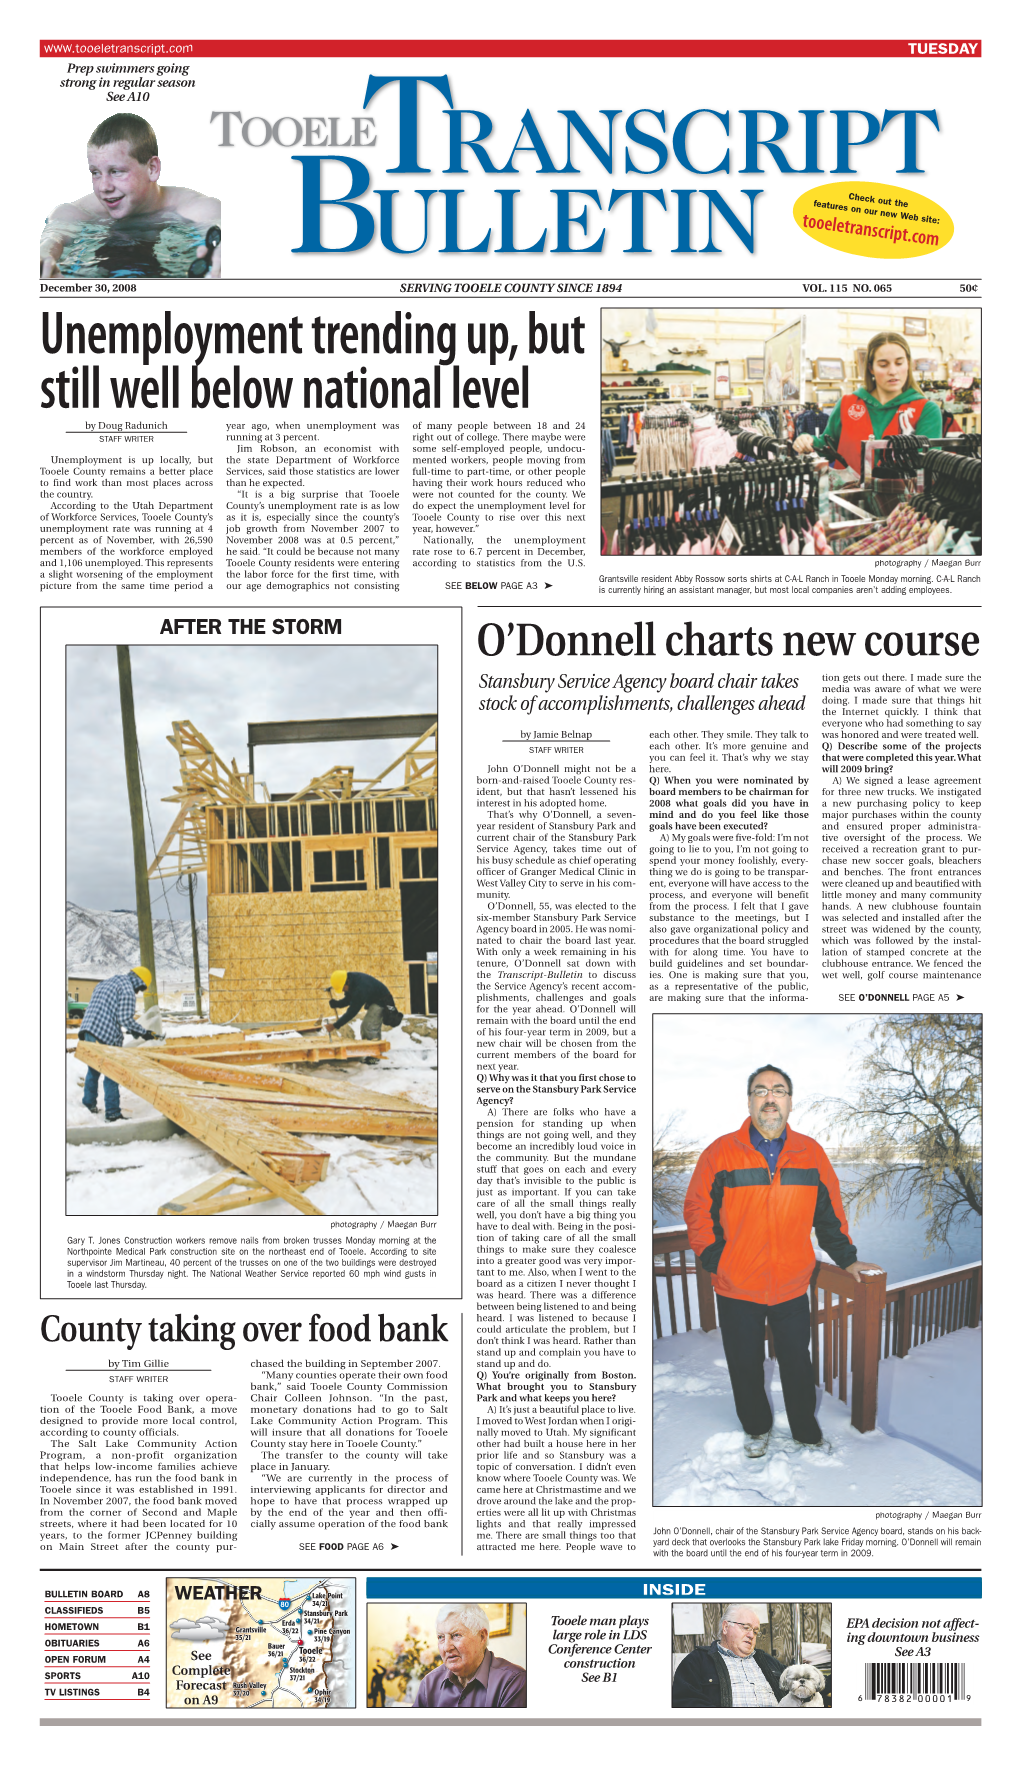 Tooele Transcript Bulletin, Published Every Tuesday and Thursday in This Newspaper